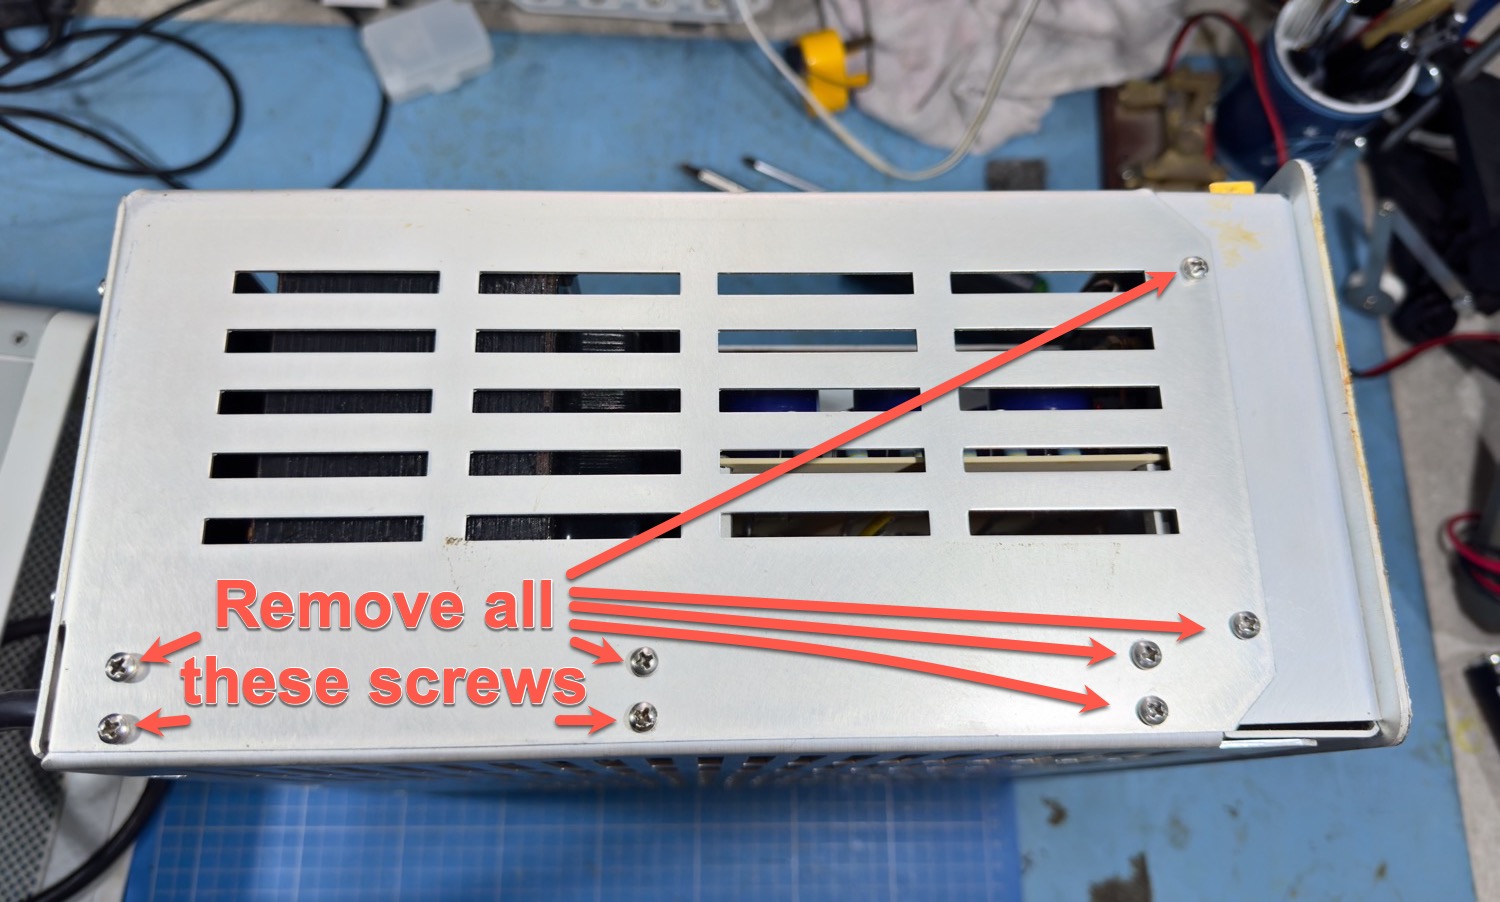 Screw Removal Time - Keep in a Safe Place.